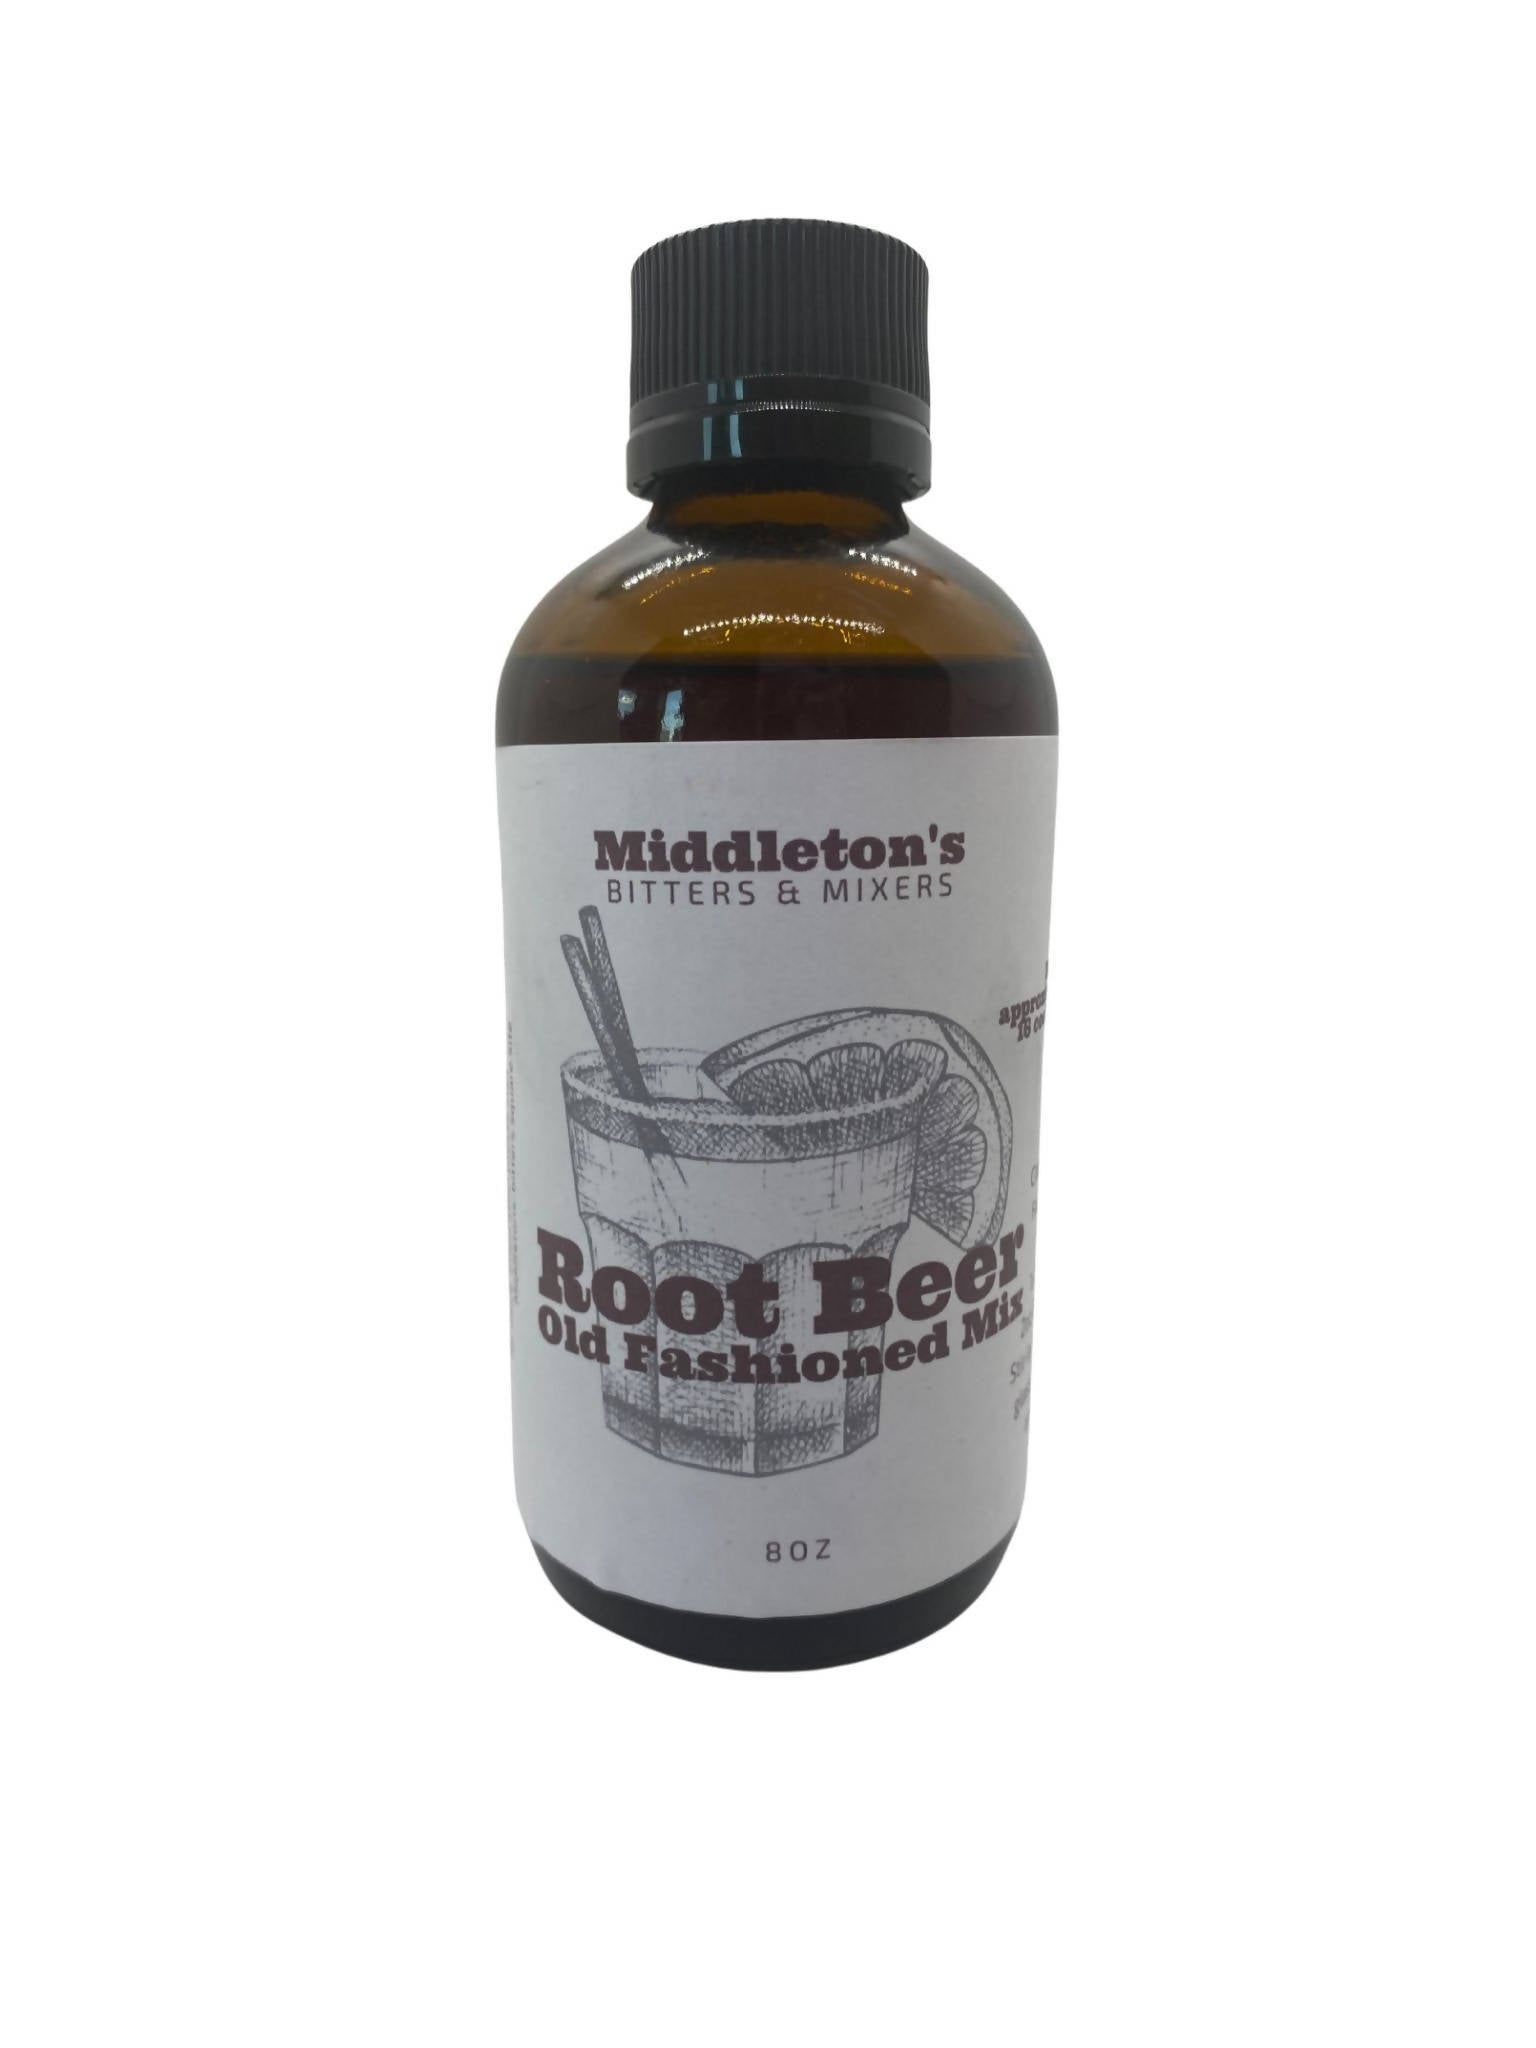 Root Beer Old Fashioned Mix - Oonnie - Middleton's Bitters